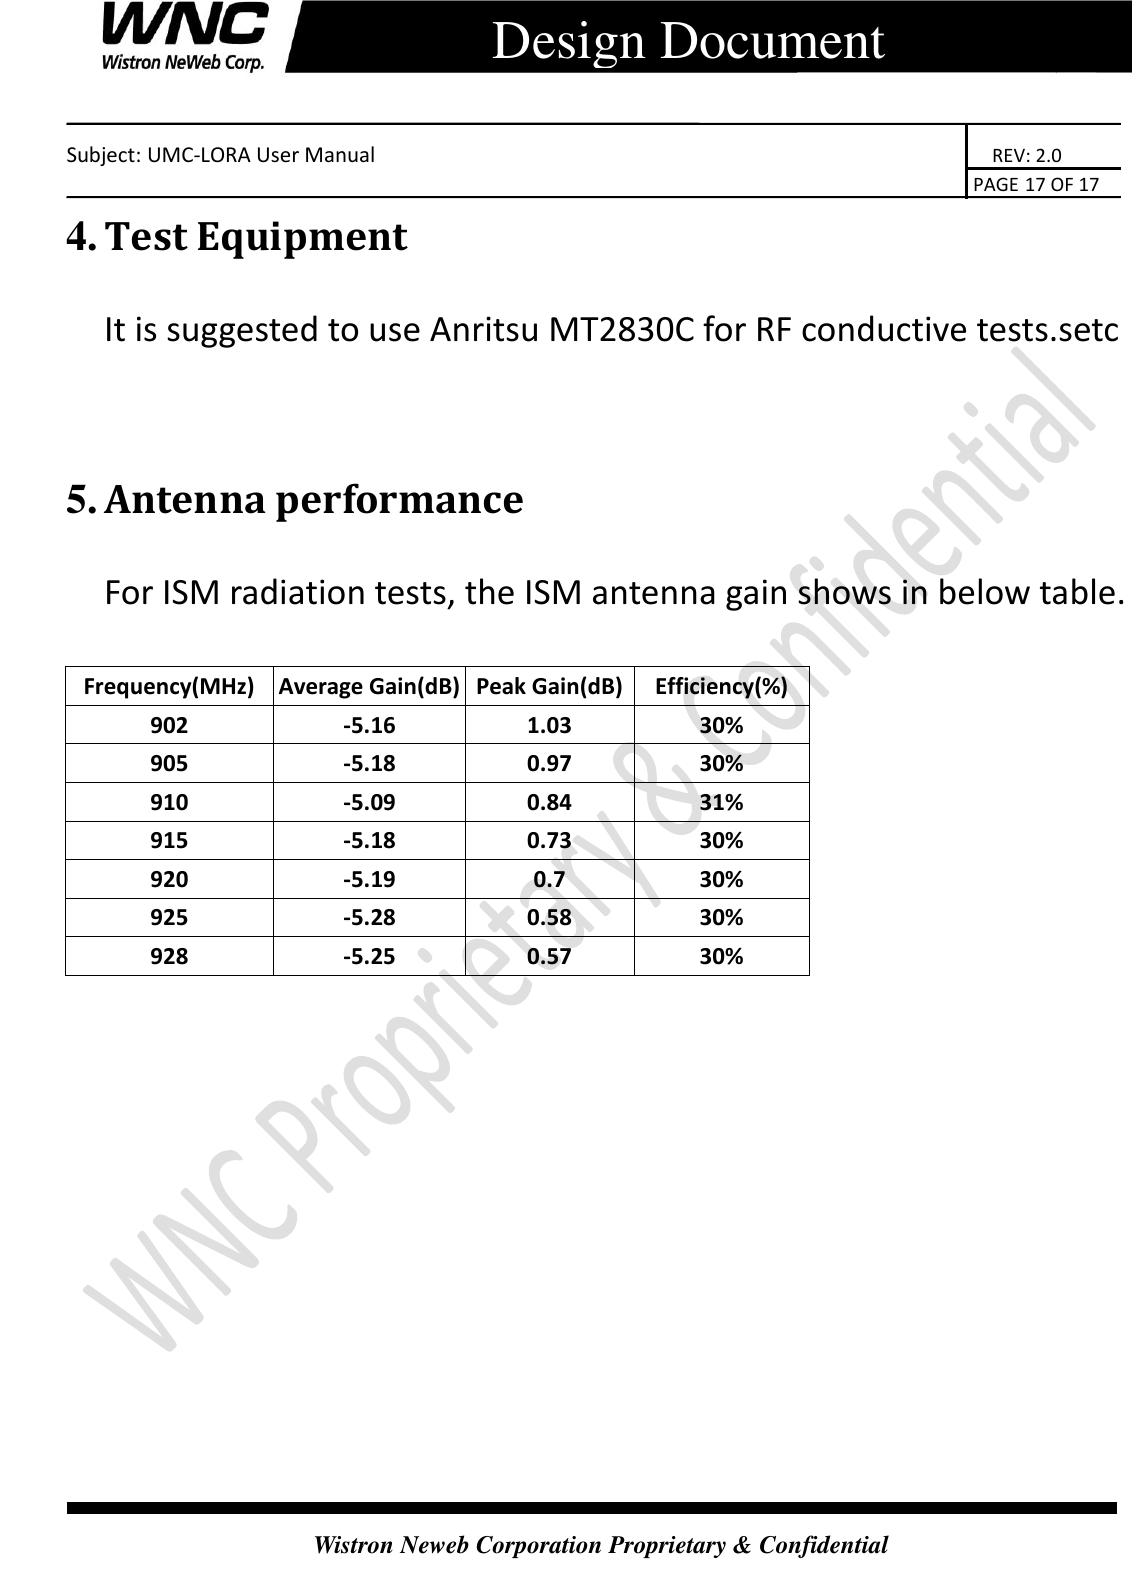    Subject: UMC-LORA User Manual                                                                      REV: 2.0                                                                                        PAGE 17 OF 17  Wistron Neweb Corporation Proprietary &amp; Confidential      Design Document 4. Test Equipment It is suggested to use Anritsu MT2830C for RF conductive tests.setc  5. Antenna performance   For ISM radiation tests, the ISM antenna gain shows in below table.  Frequency(MHz) Average Gain(dB) Peak Gain(dB) Efficiency(%) 902 -5.16 1.03 30% 905 -5.18 0.97 30% 910 -5.09 0.84 31% 915 -5.18 0.73 30% 920 -5.19 0.7 30% 925 -5.28 0.58 30% 928 -5.25 0.57 30%  